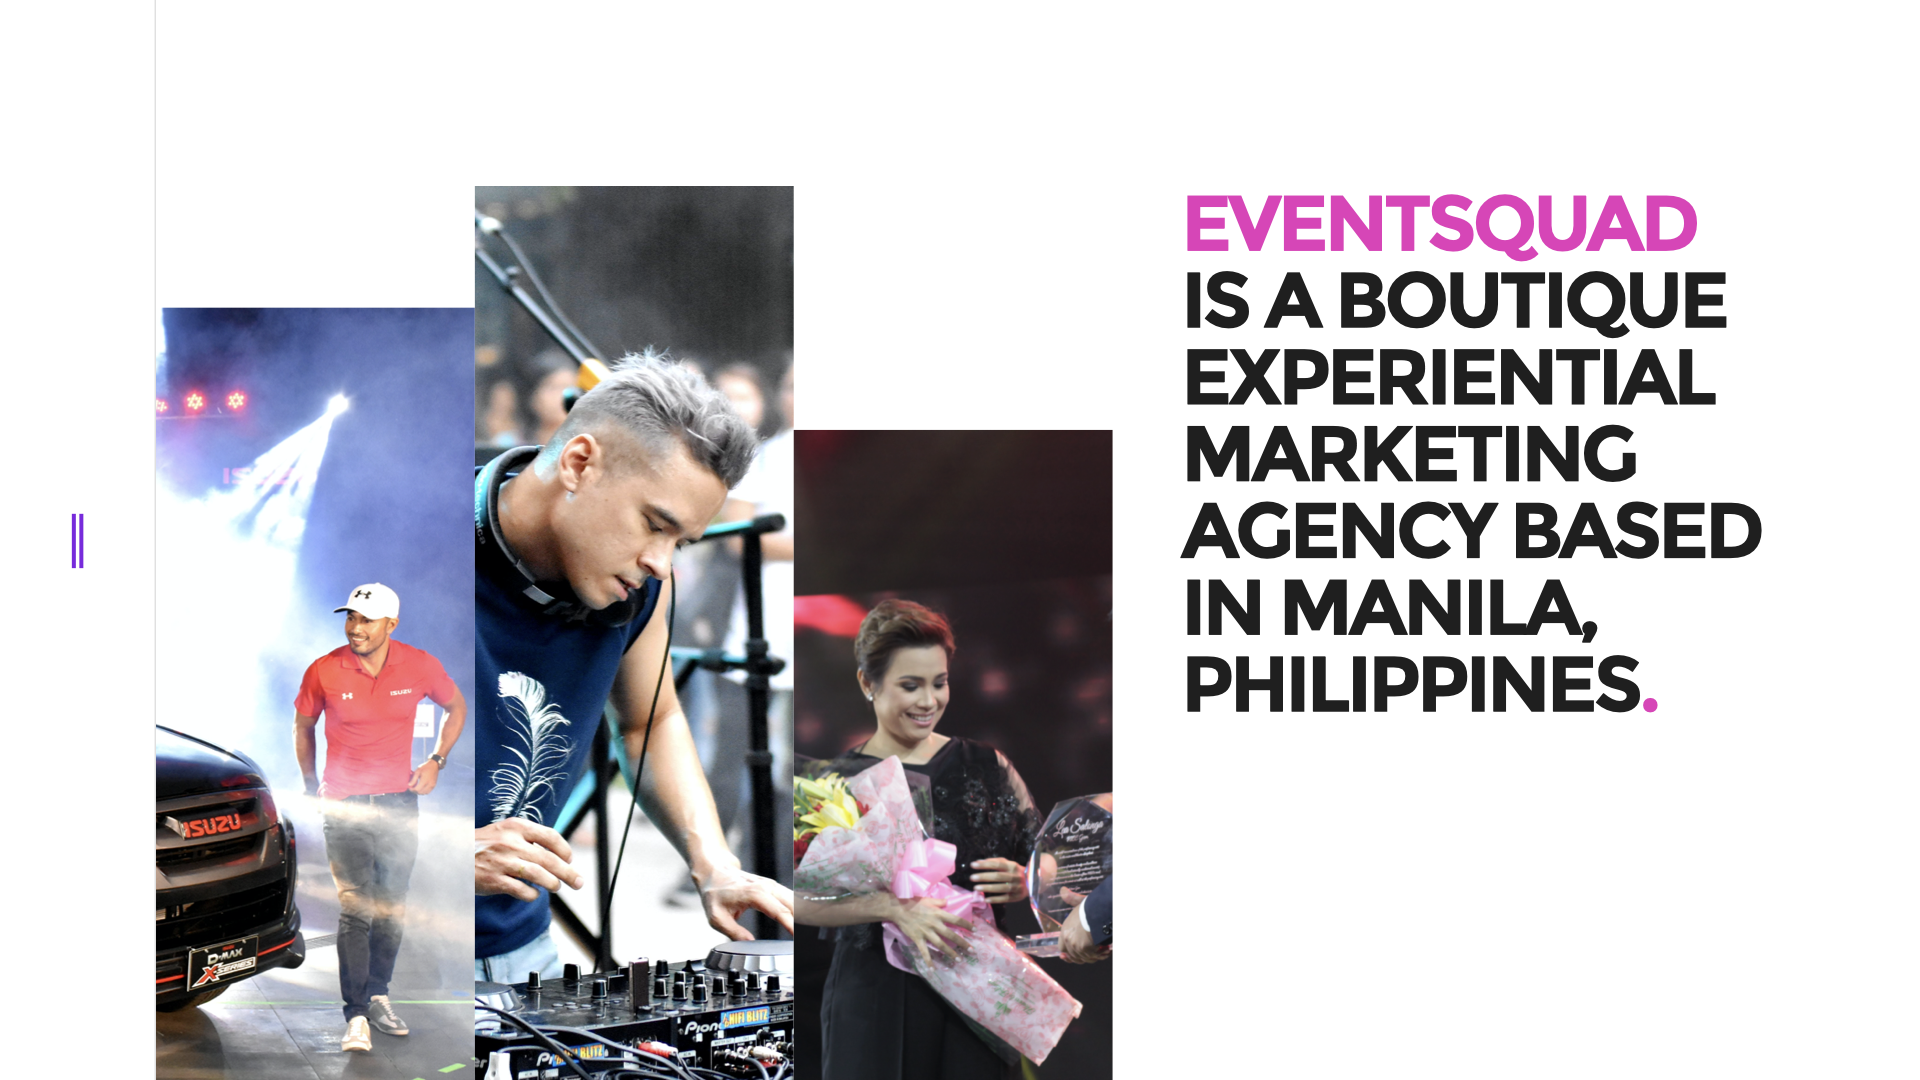 EventSquad is a boutique experiential marketing agency based in Manila, Philippines.